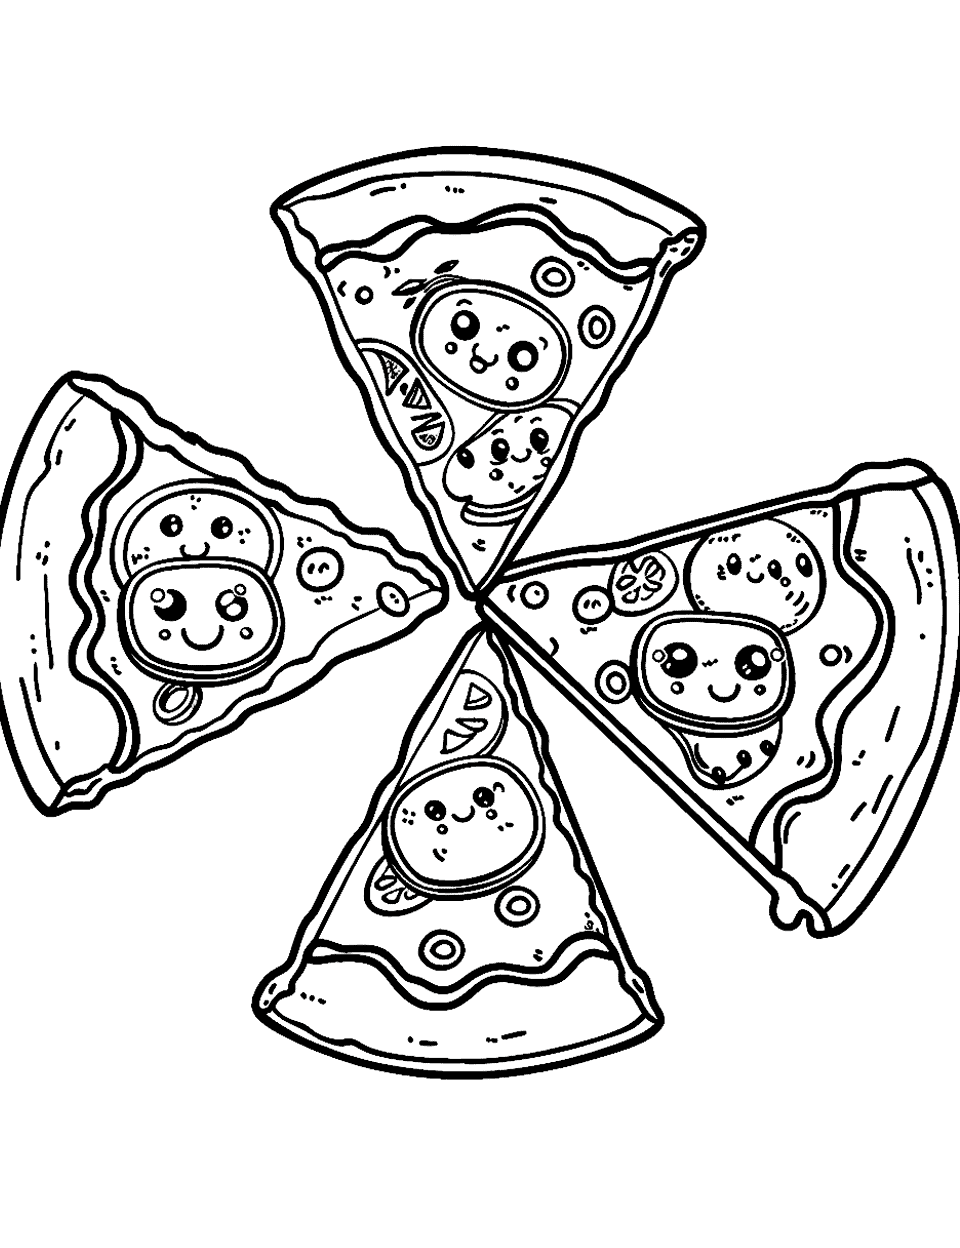 Kawaii Pizza Party Coloring Page - Several cute pizza slices with faces, each having slight different toppings.